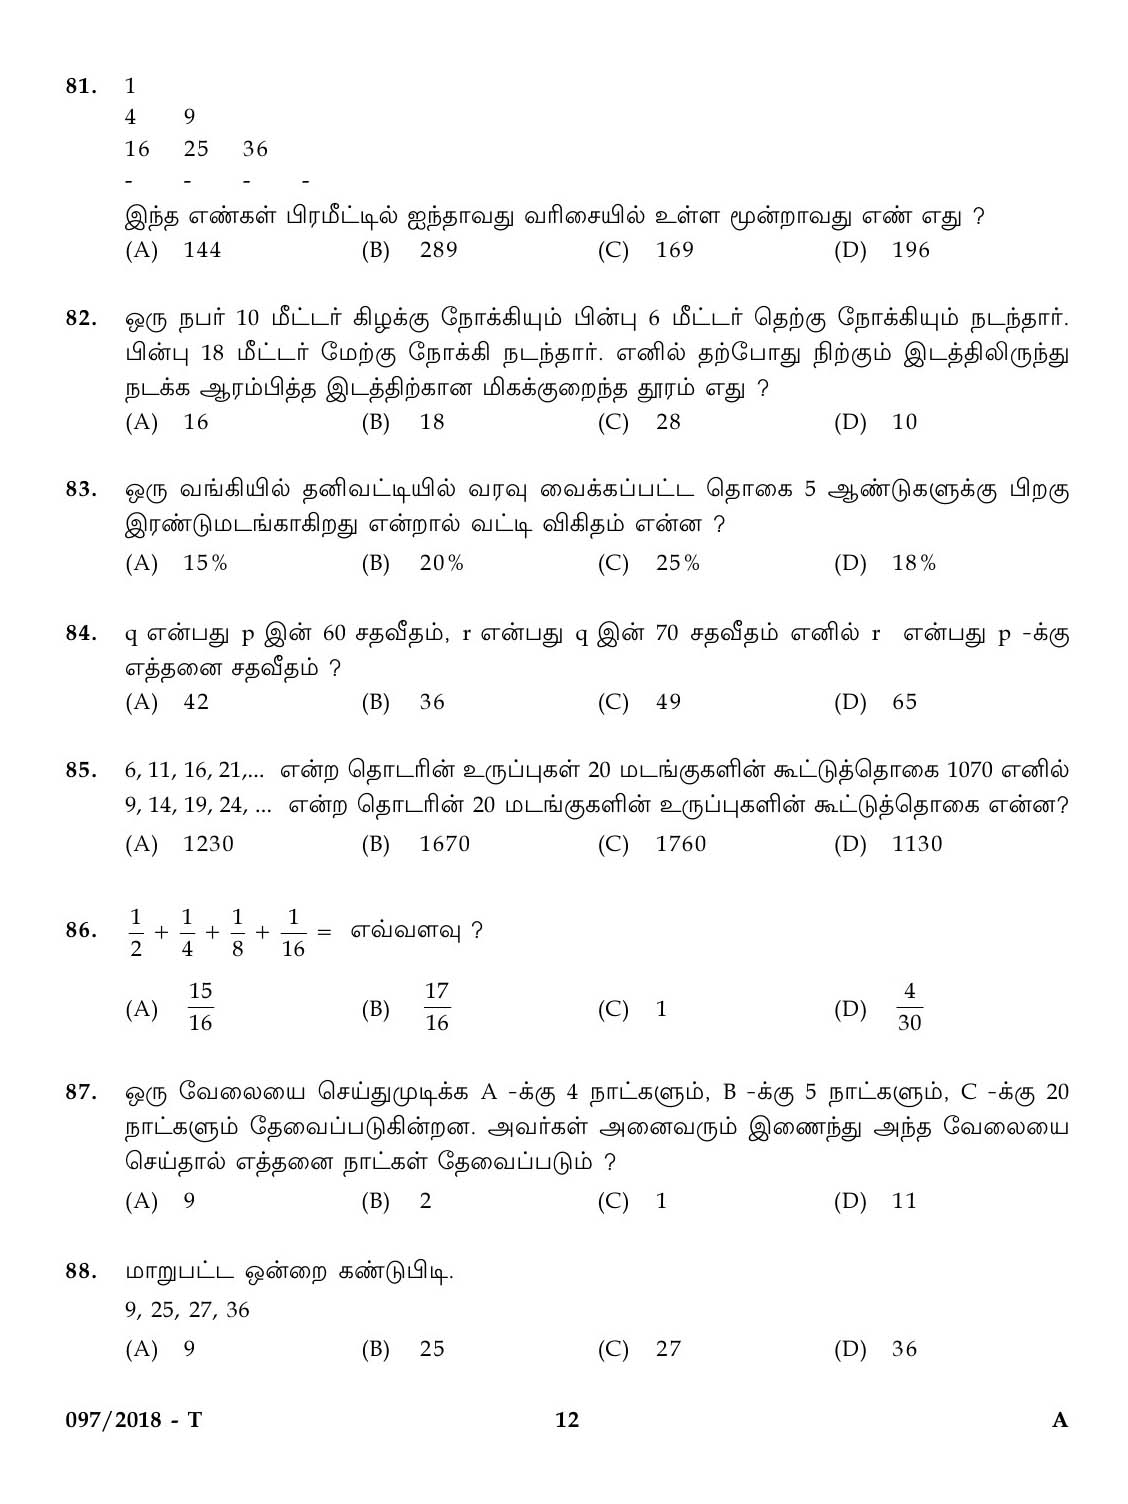 KPSC Lab Assistant Higher Secondary Education Exam 2018 Code 0972018 T 11